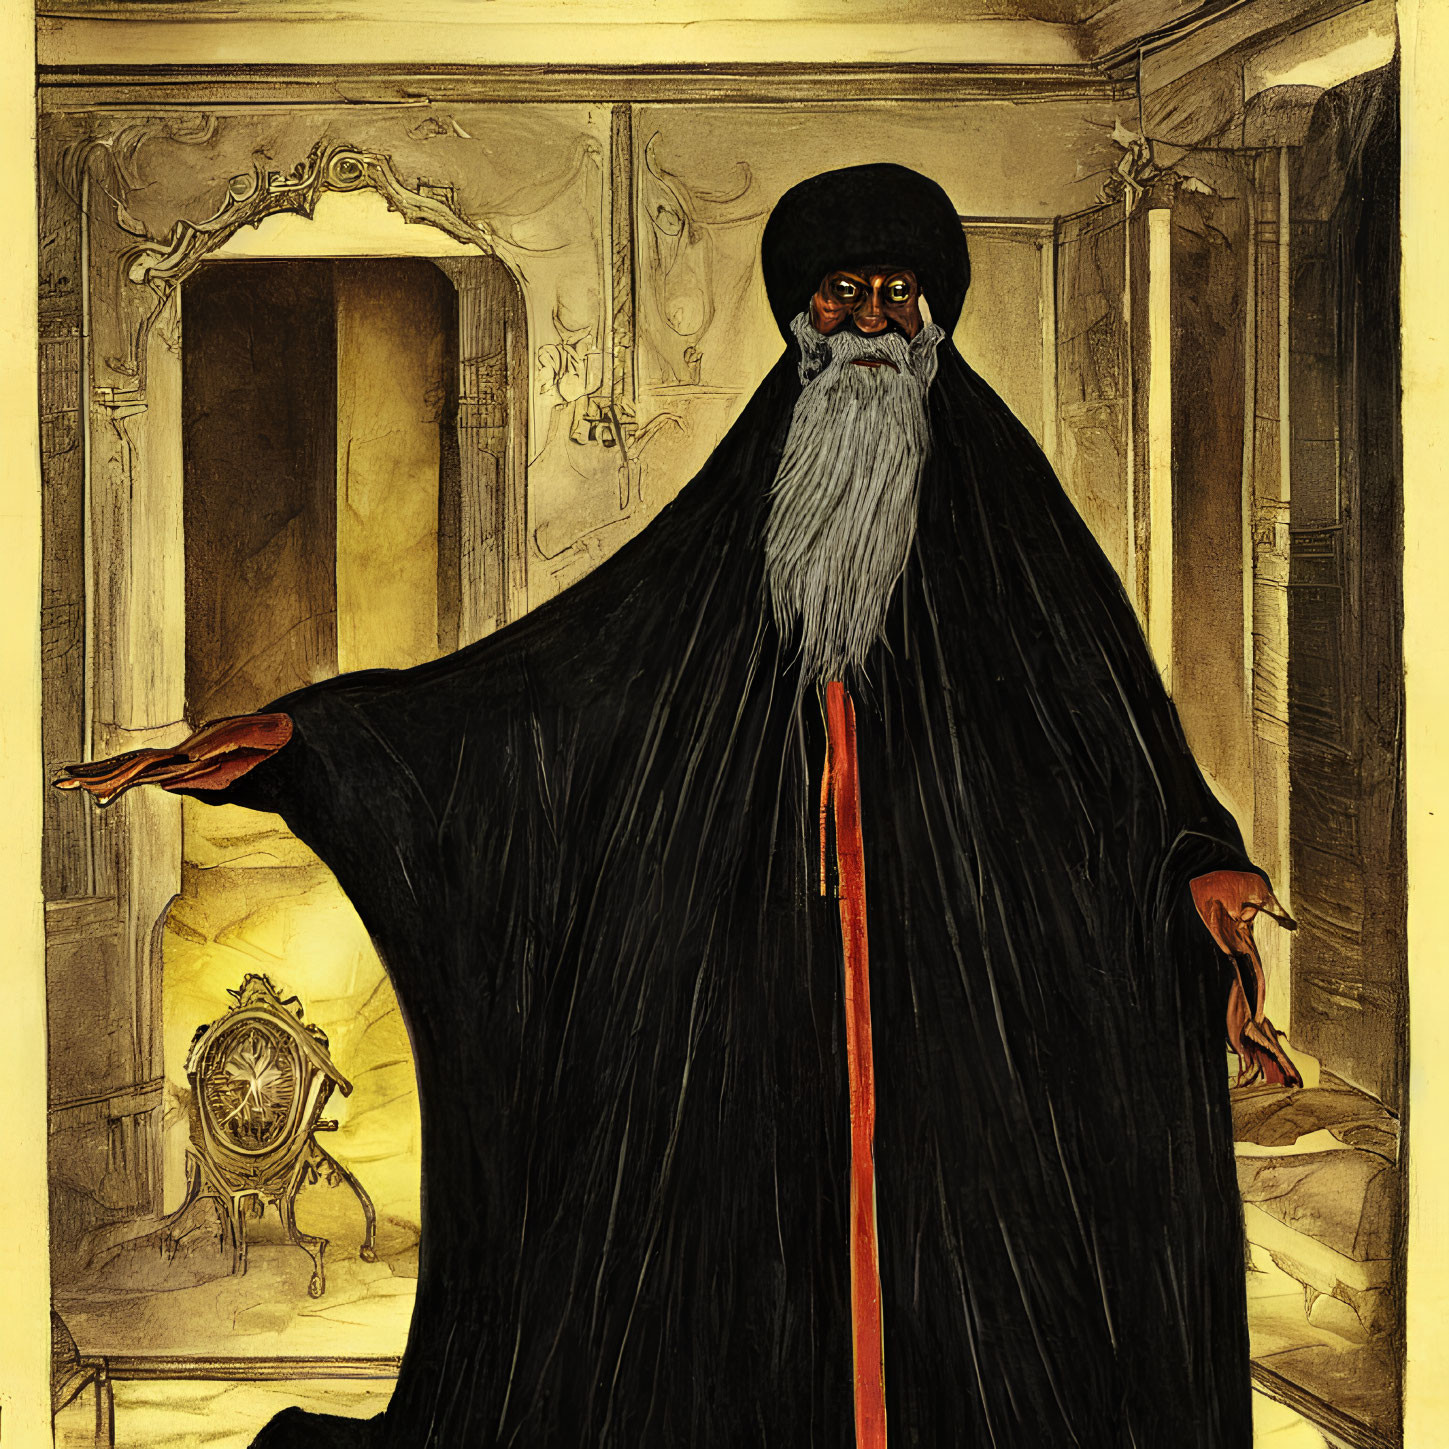 Bearded figure in dark robe and hat with staff in ornate room